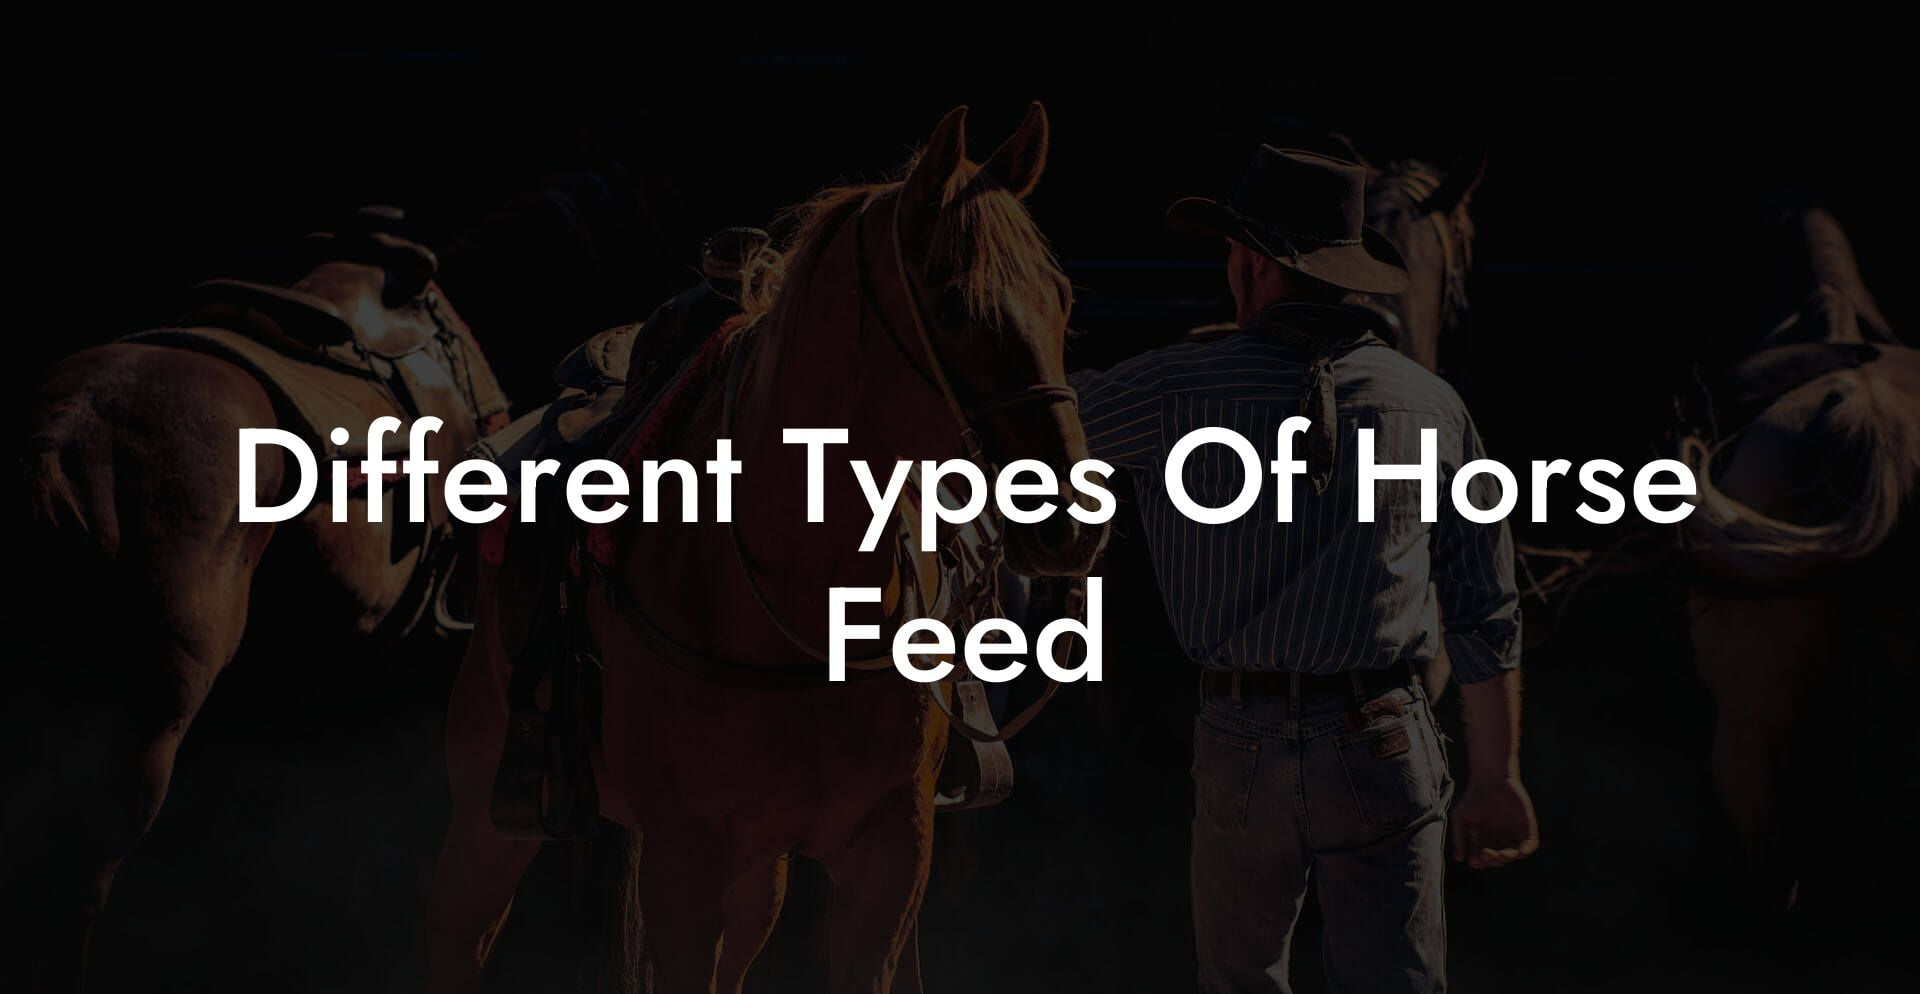 Different Types Of Horse Feed